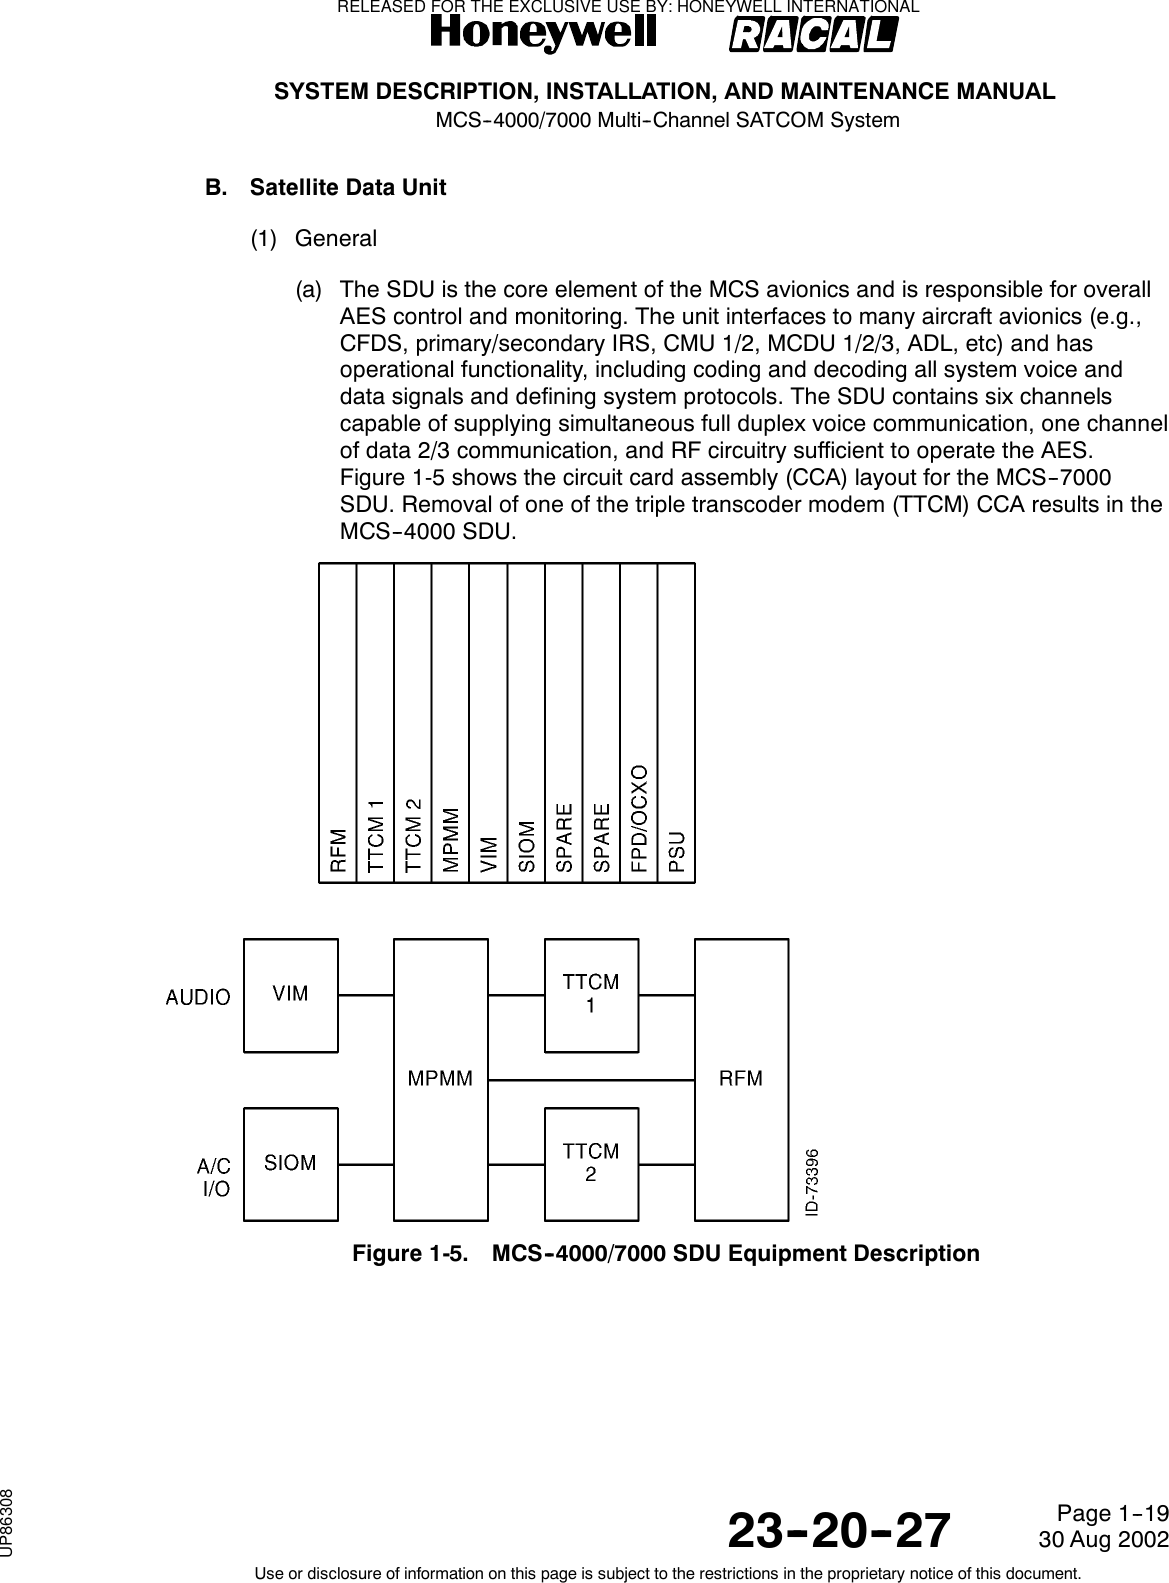 SYSTEM DESCRIPTION, INSTALLATION, AND MAINTENANCE MANUALMCS--4000/7000 Multi--Channel SATCOM System23--20--2730 Aug 2002Use or disclosure of information on this page is subject to the restrictions in the proprietary notice of this document.Page 1--19B. Satellite Data Unit(1) General(a) The SDU is the core element of the MCS avionics and is responsible for overallAES control and monitoring. The unit interfaces to many aircraft avionics (e.g.,CFDS, primary/secondary IRS, CMU 1/2, MCDU 1/2/3, ADL, etc) and hasoperational functionality, including coding and decoding all system voice anddata signals and defining system protocols. The SDU contains six channelscapable of supplying simultaneous full duplex voice communication, one channelof data 2/3 communication, and RF circuitry sufficient to operate the AES.Figure 1-5 shows the circuit card assembly (CCA) layout for the MCS--7000SDU. Removal of one of the triple transcoder modem (TTCM) CCA results in theMCS--4000 SDU.Figure 1-5. MCS--4000/7000 SDU Equipment DescriptionRELEASED FOR THE EXCLUSIVE USE BY: HONEYWELL INTERNATIONALUP86308